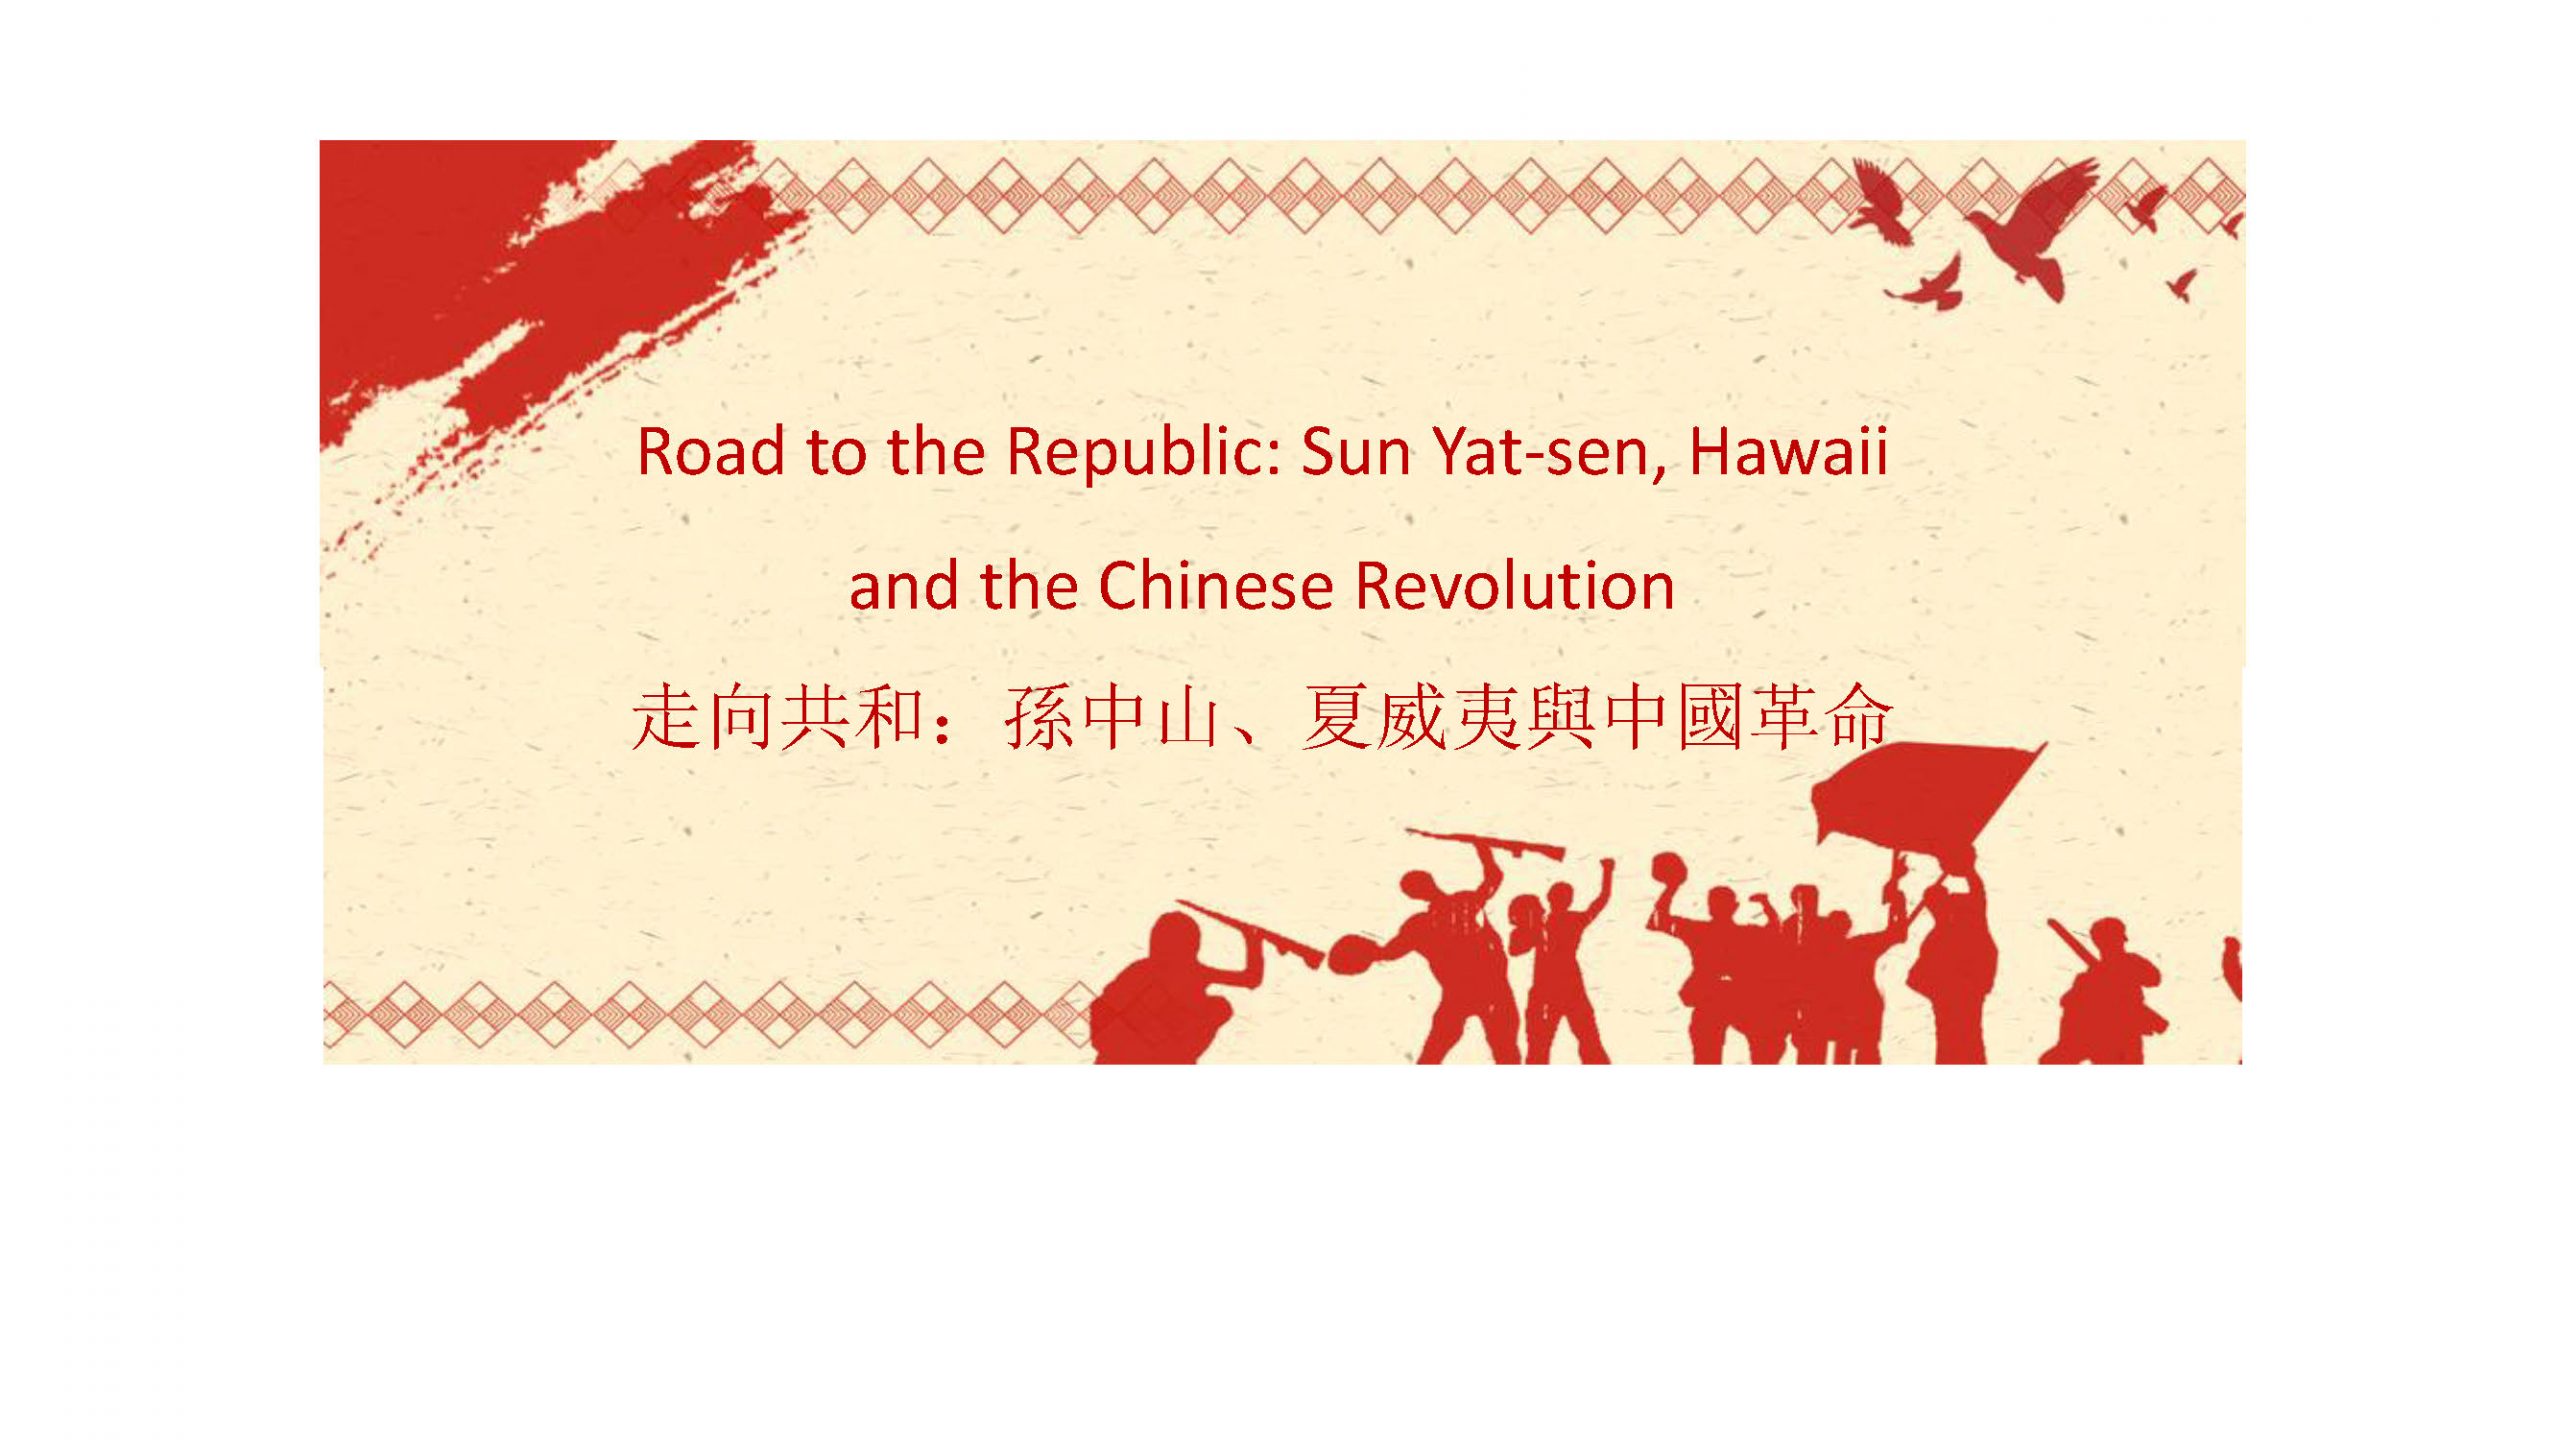 Road to the Republic: Sun Yat-sen, Hawaii and the Chinese Revolution